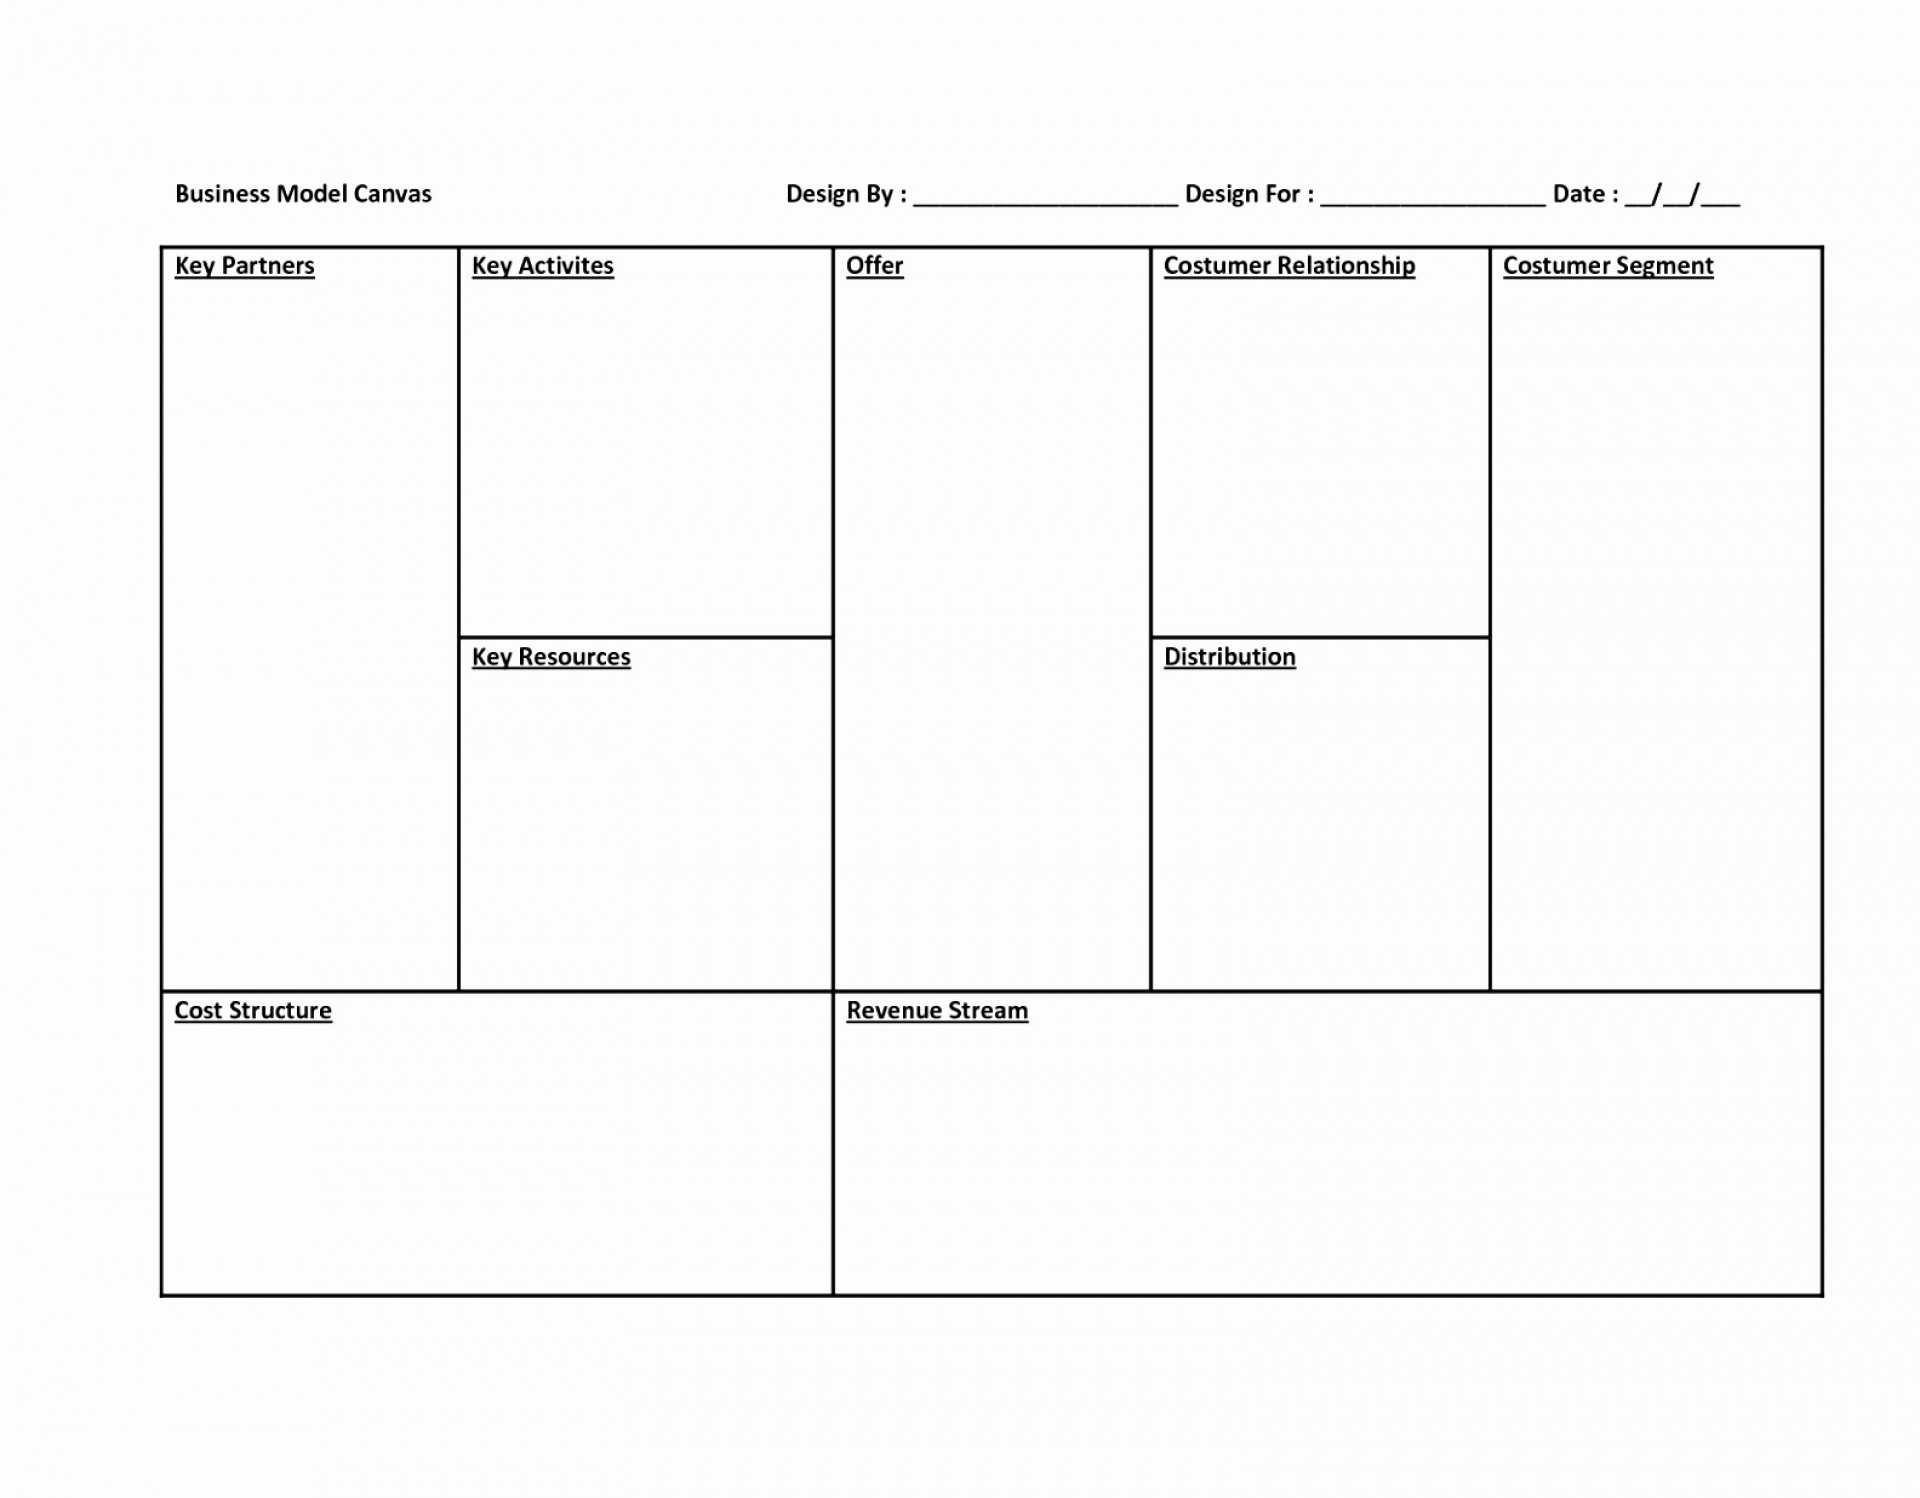 015 New Kepner Tregoe Decision Analysis Template Siett Within Business Canvas Word Template